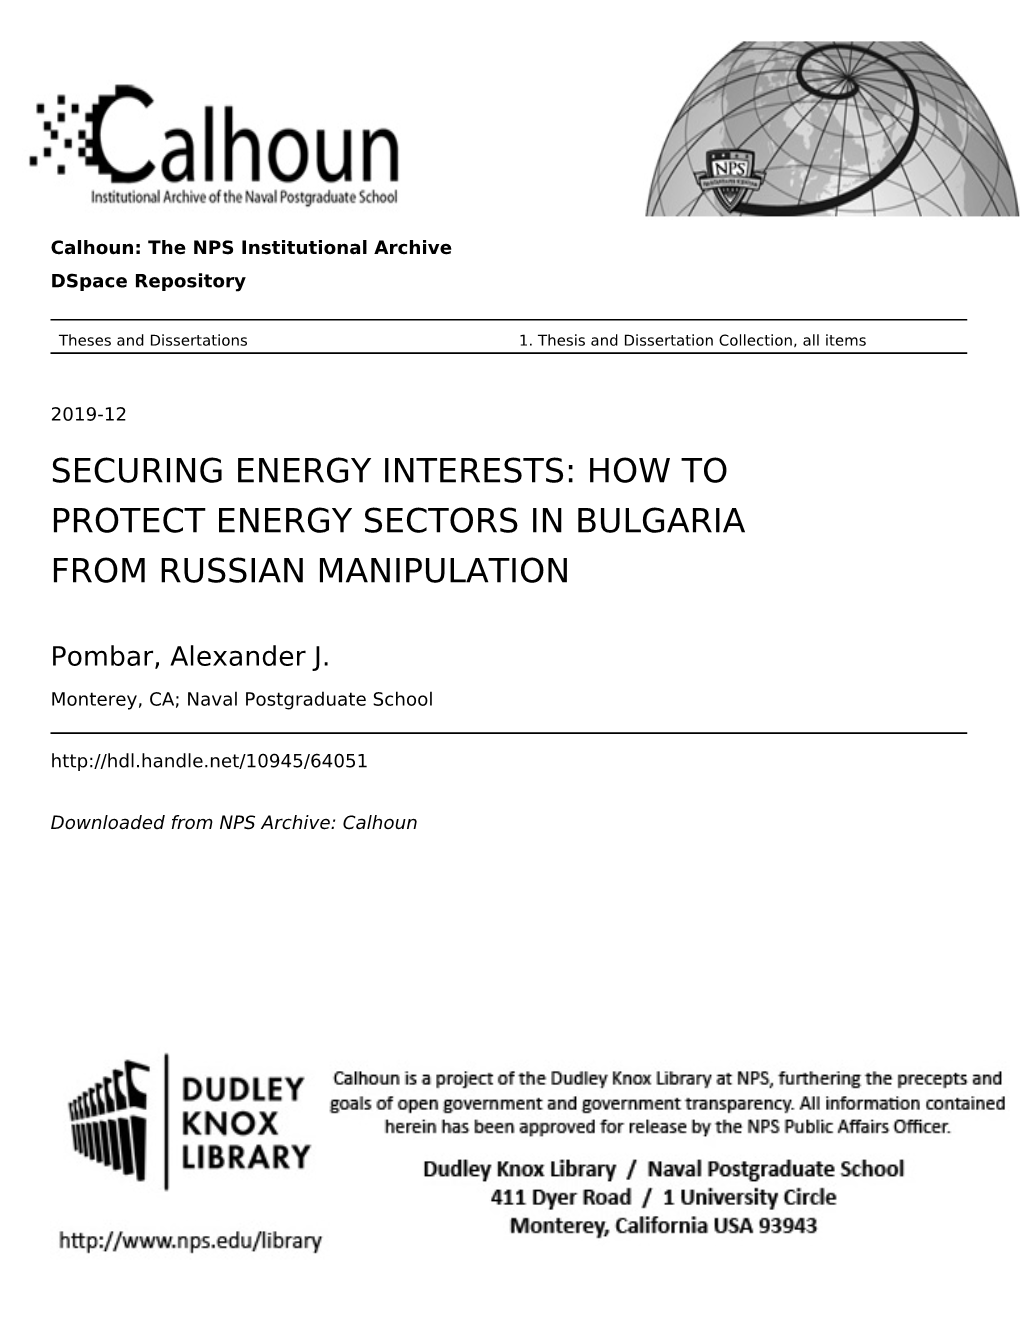 Securing Energy Interests: How to Protect Energy Sectors in Bulgaria from Russian Manipulation